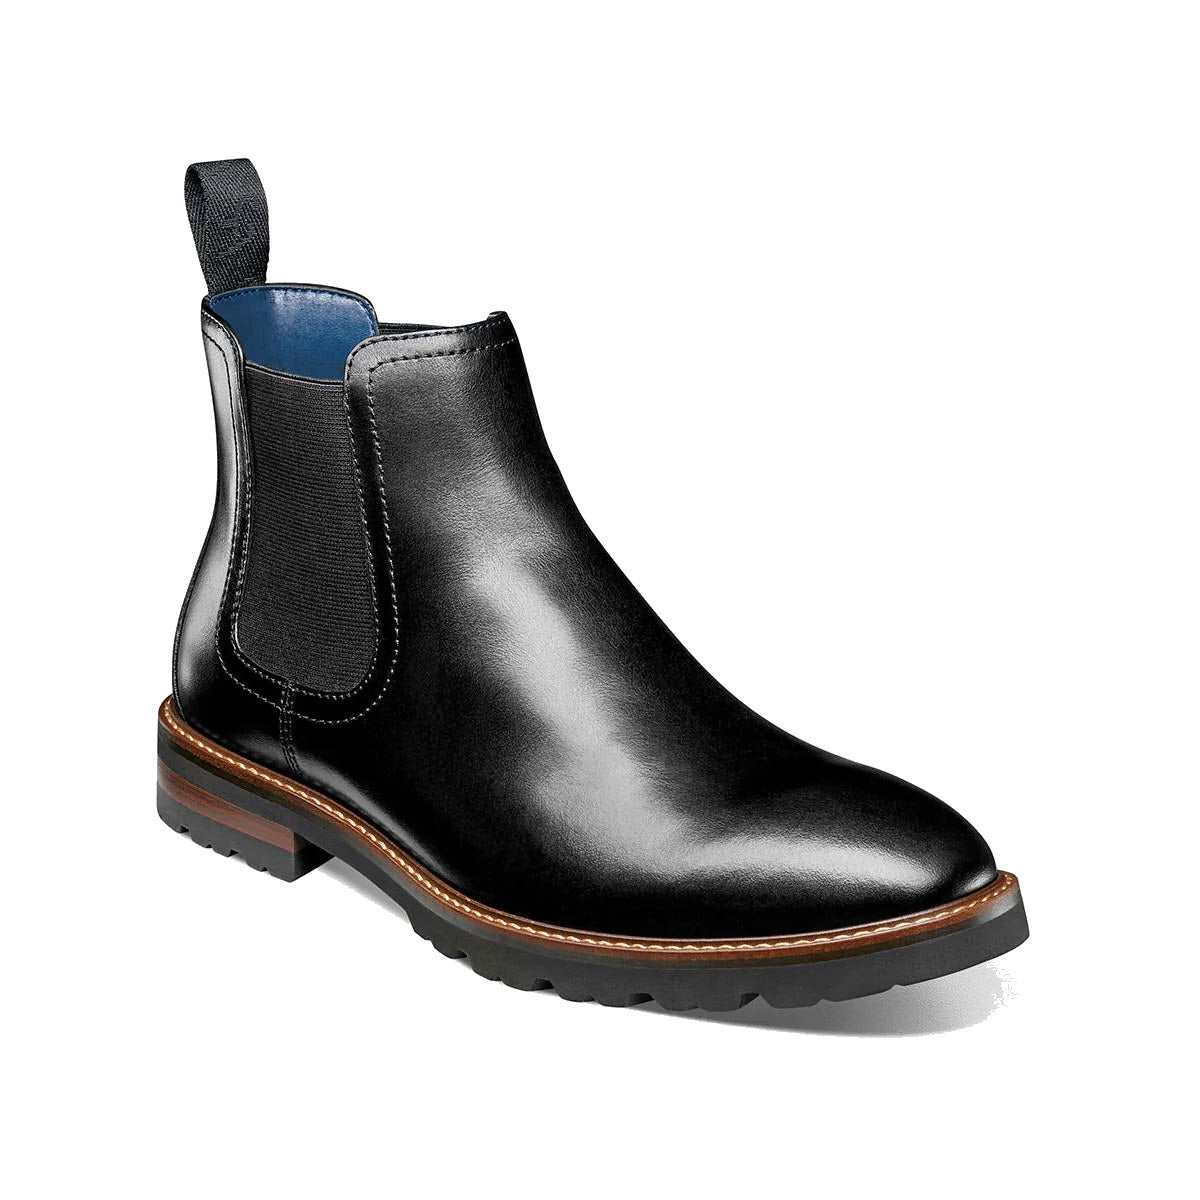 A black leather Florsheim RENEGADE PLAIN TOE GORE boot with elastic side panels, pull tab, and brown trim on a white background.